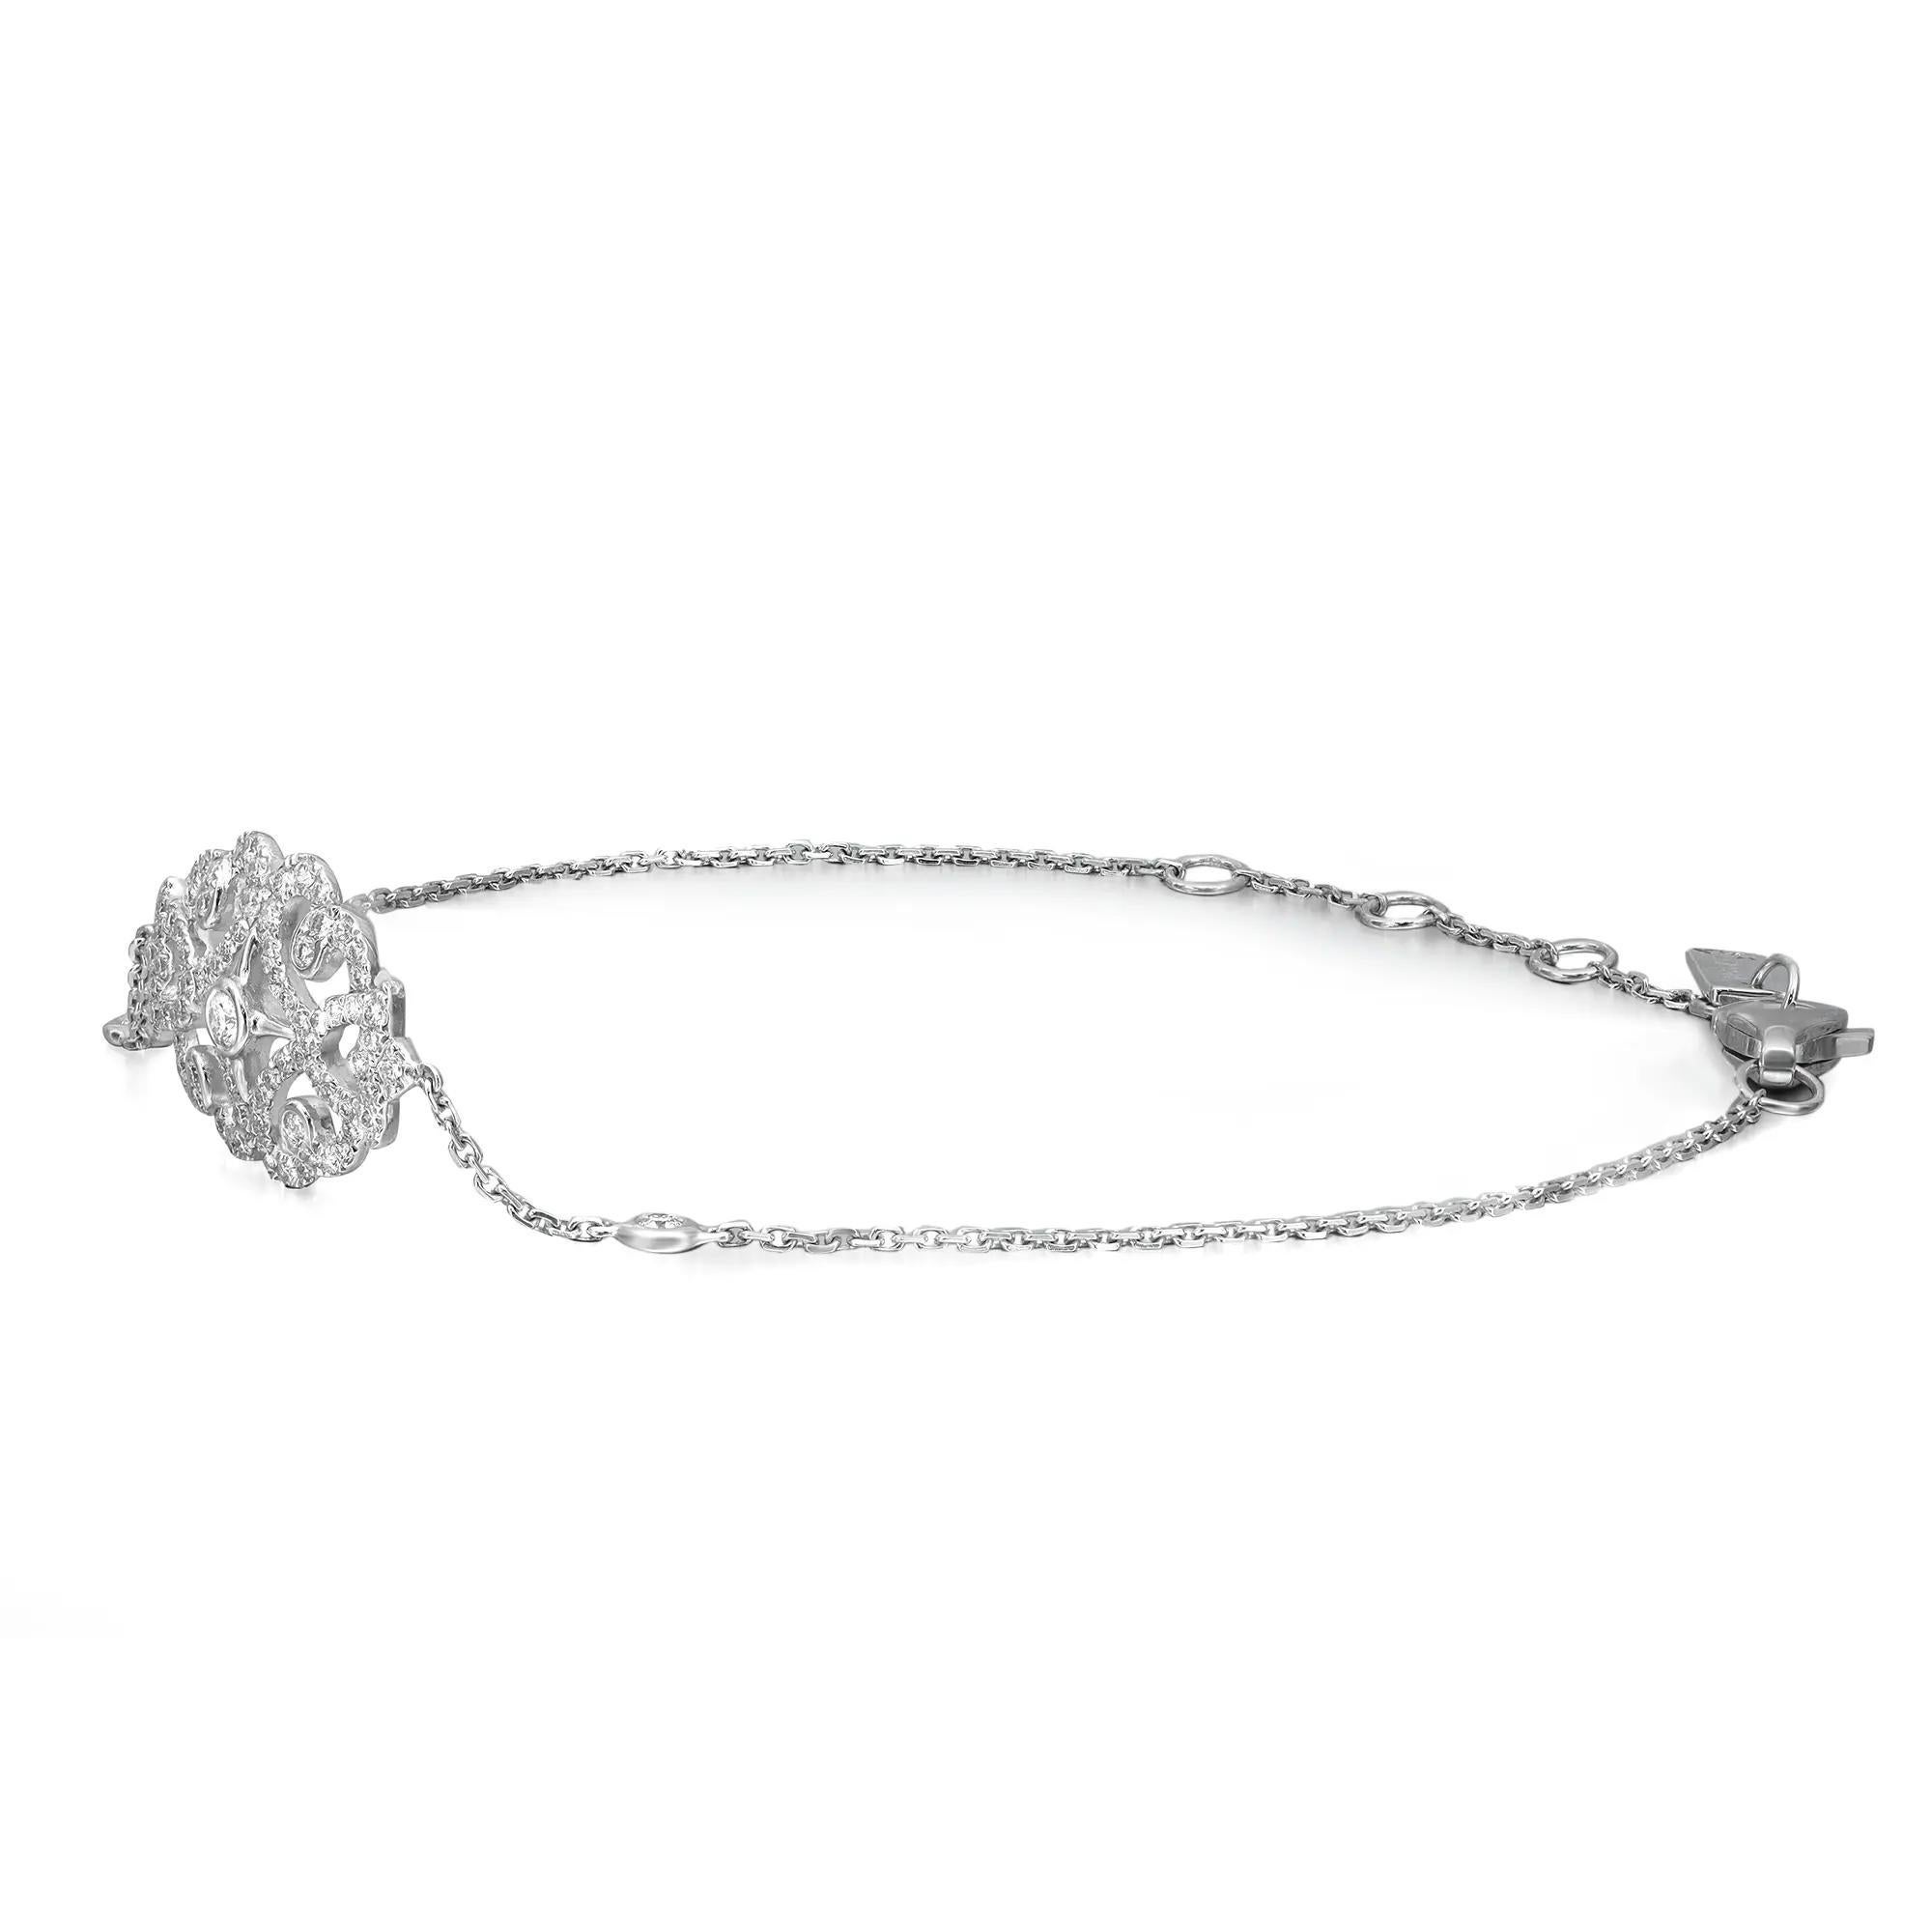 Get the perfect dazzling everyday look with this weightless beautiful chain bracelet from the Messika Sultane collection. Crafted in high polish 18K white gold. It's stackable and easy to mix and match. This bracelet features a floral motif studded